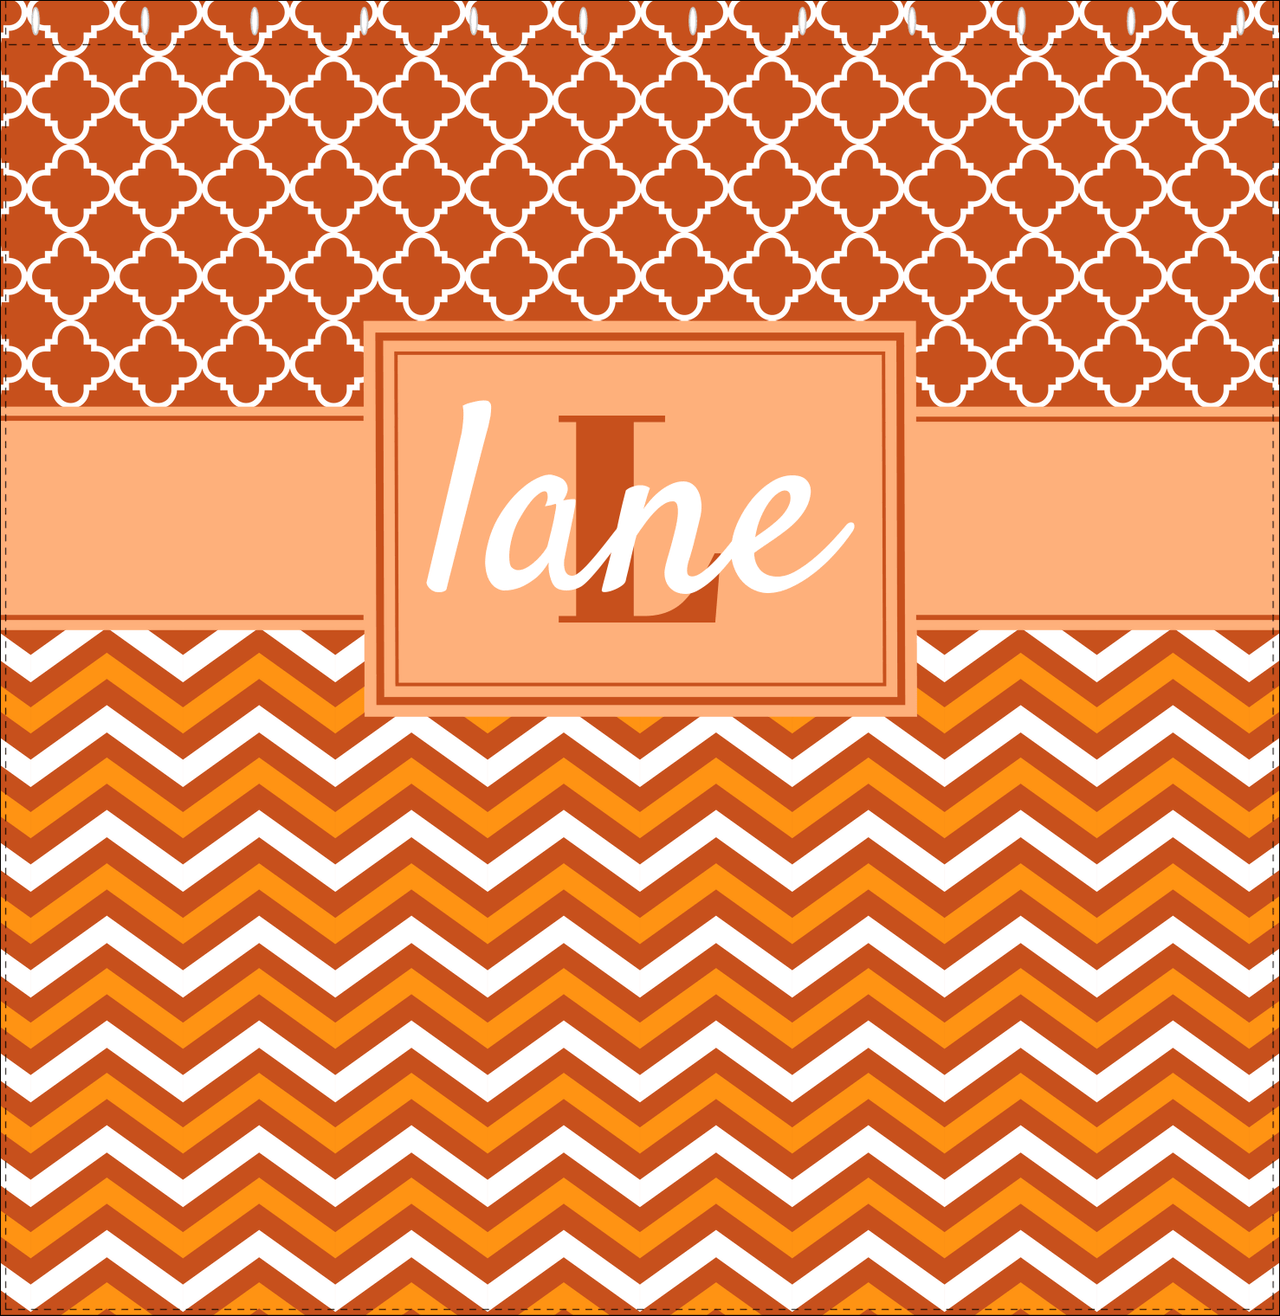 Personalized Quatrefoil and Chevron II Shower Curtain - Orange and White - Rectangle Nameplate - Decorate View